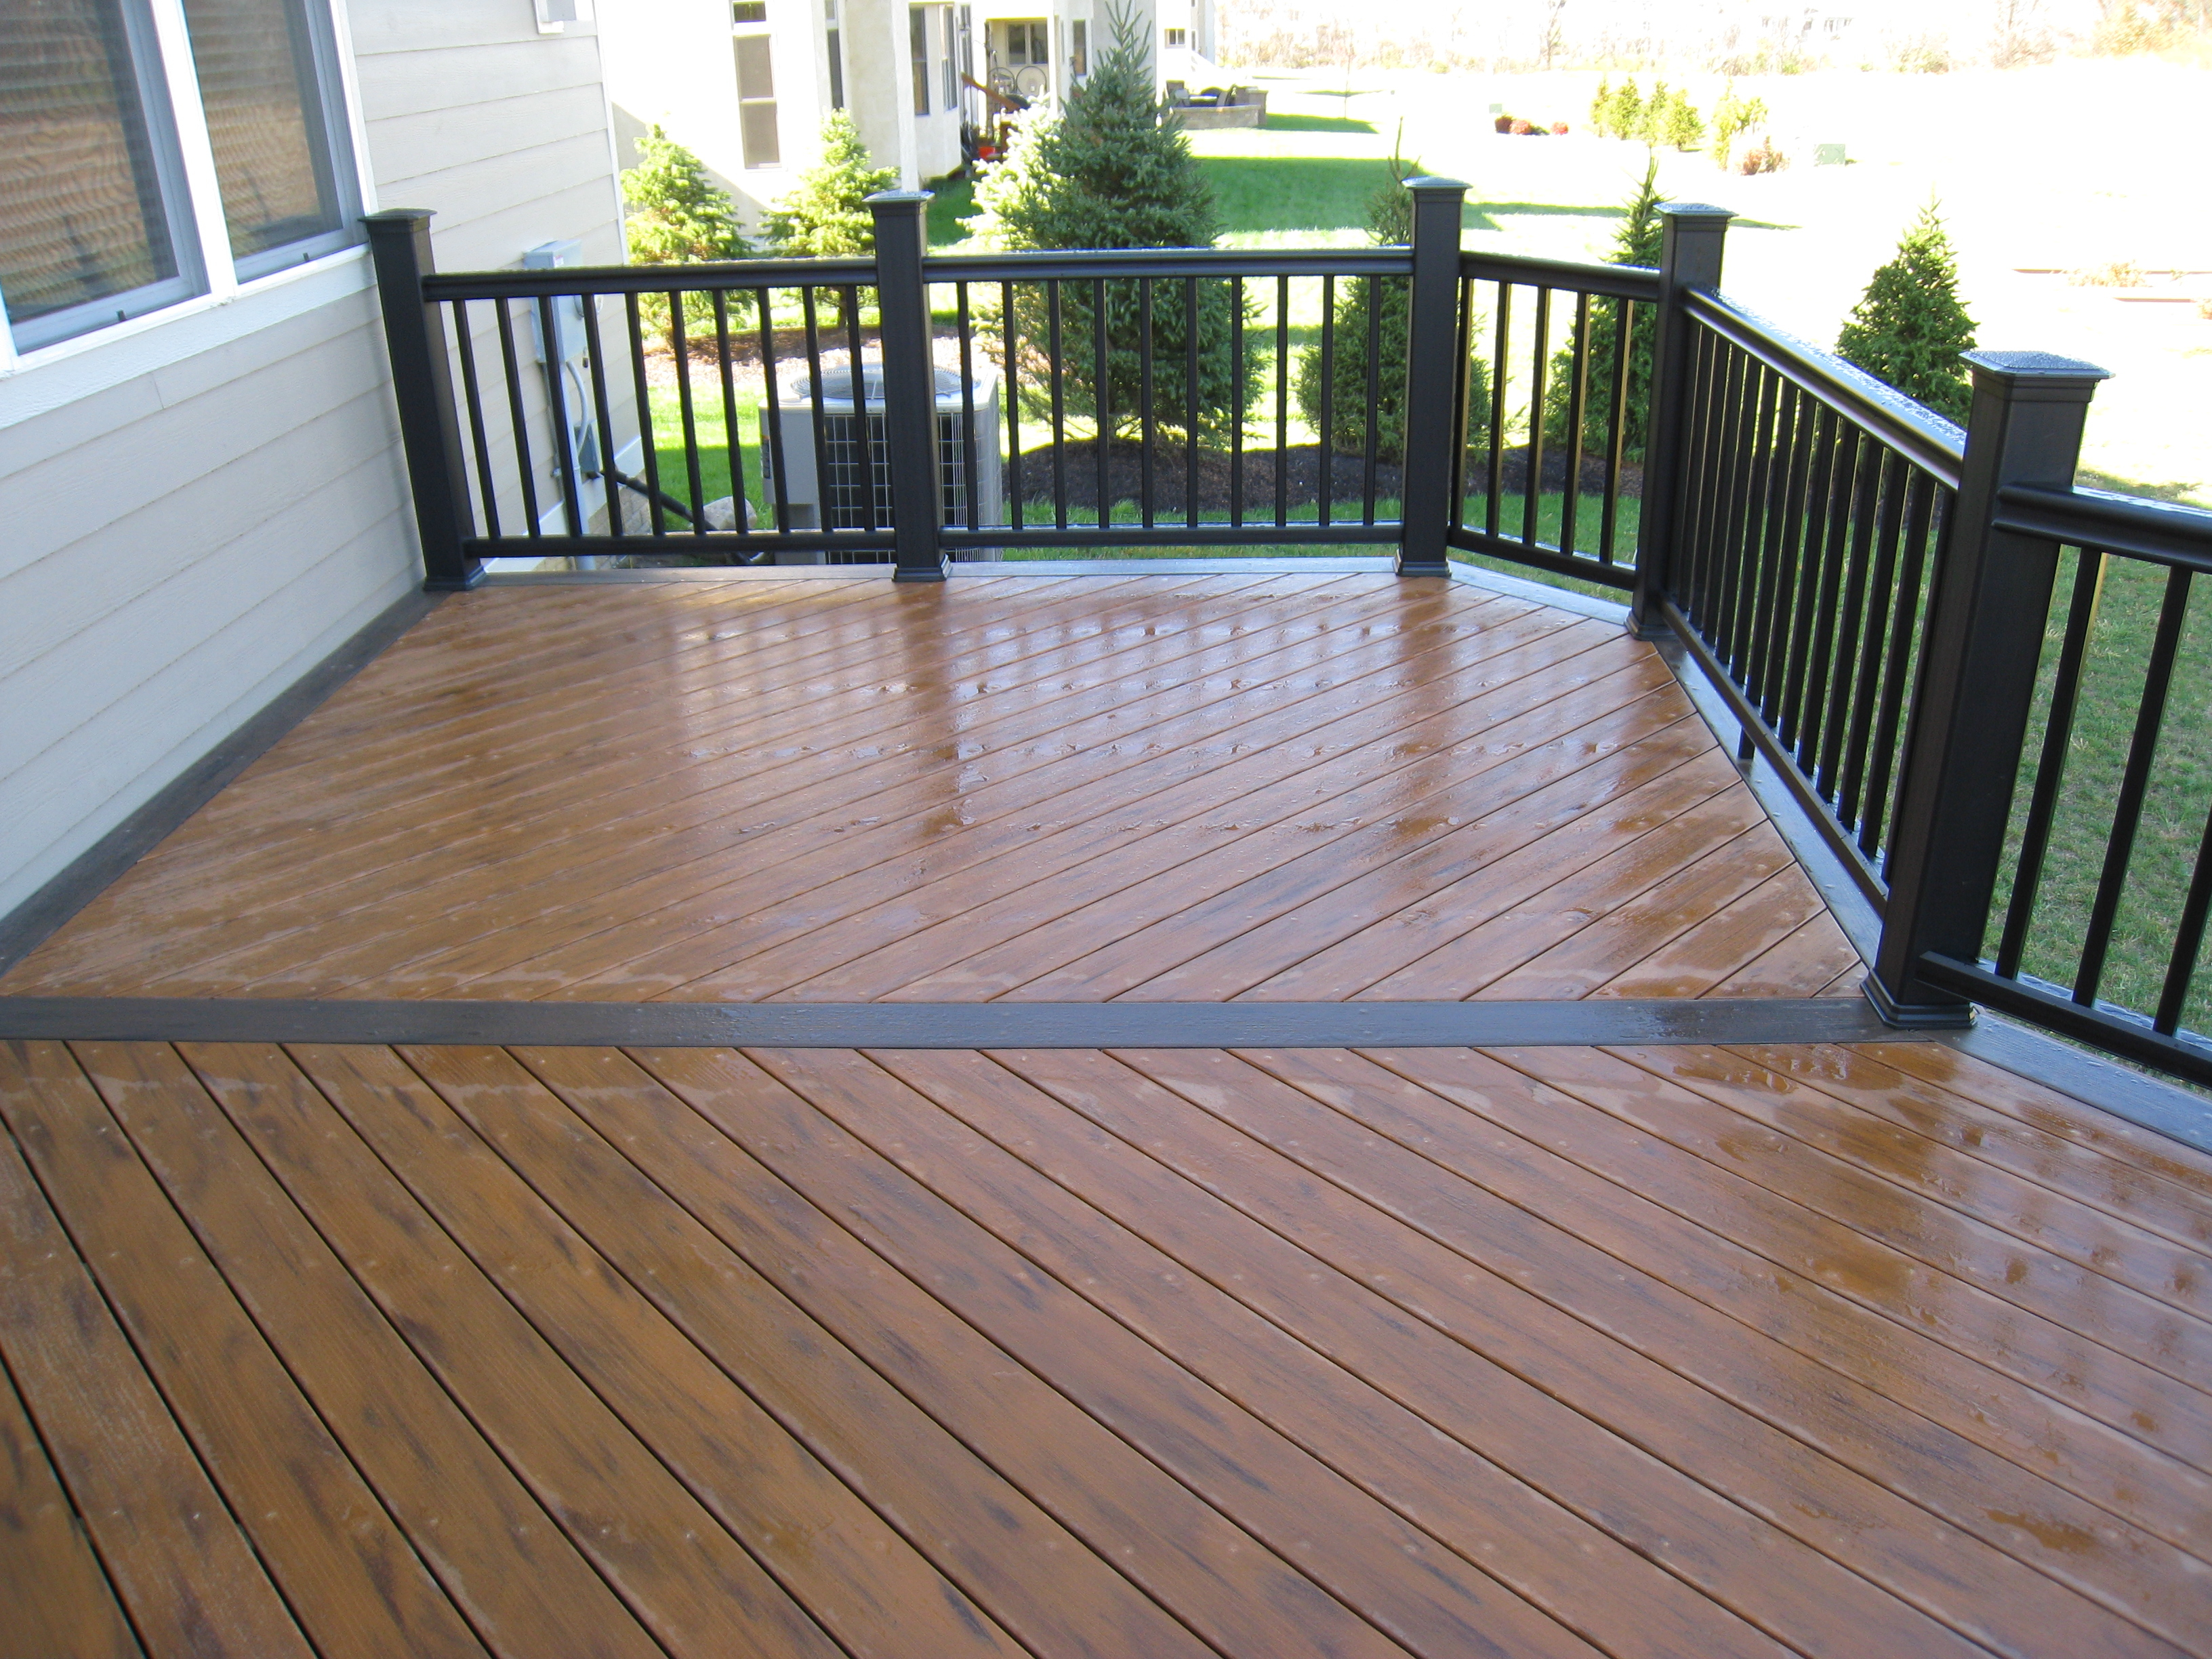 Timbertech Evolutions Decking Columbus Decks Porches And Patios in sizing 3264 X 2448